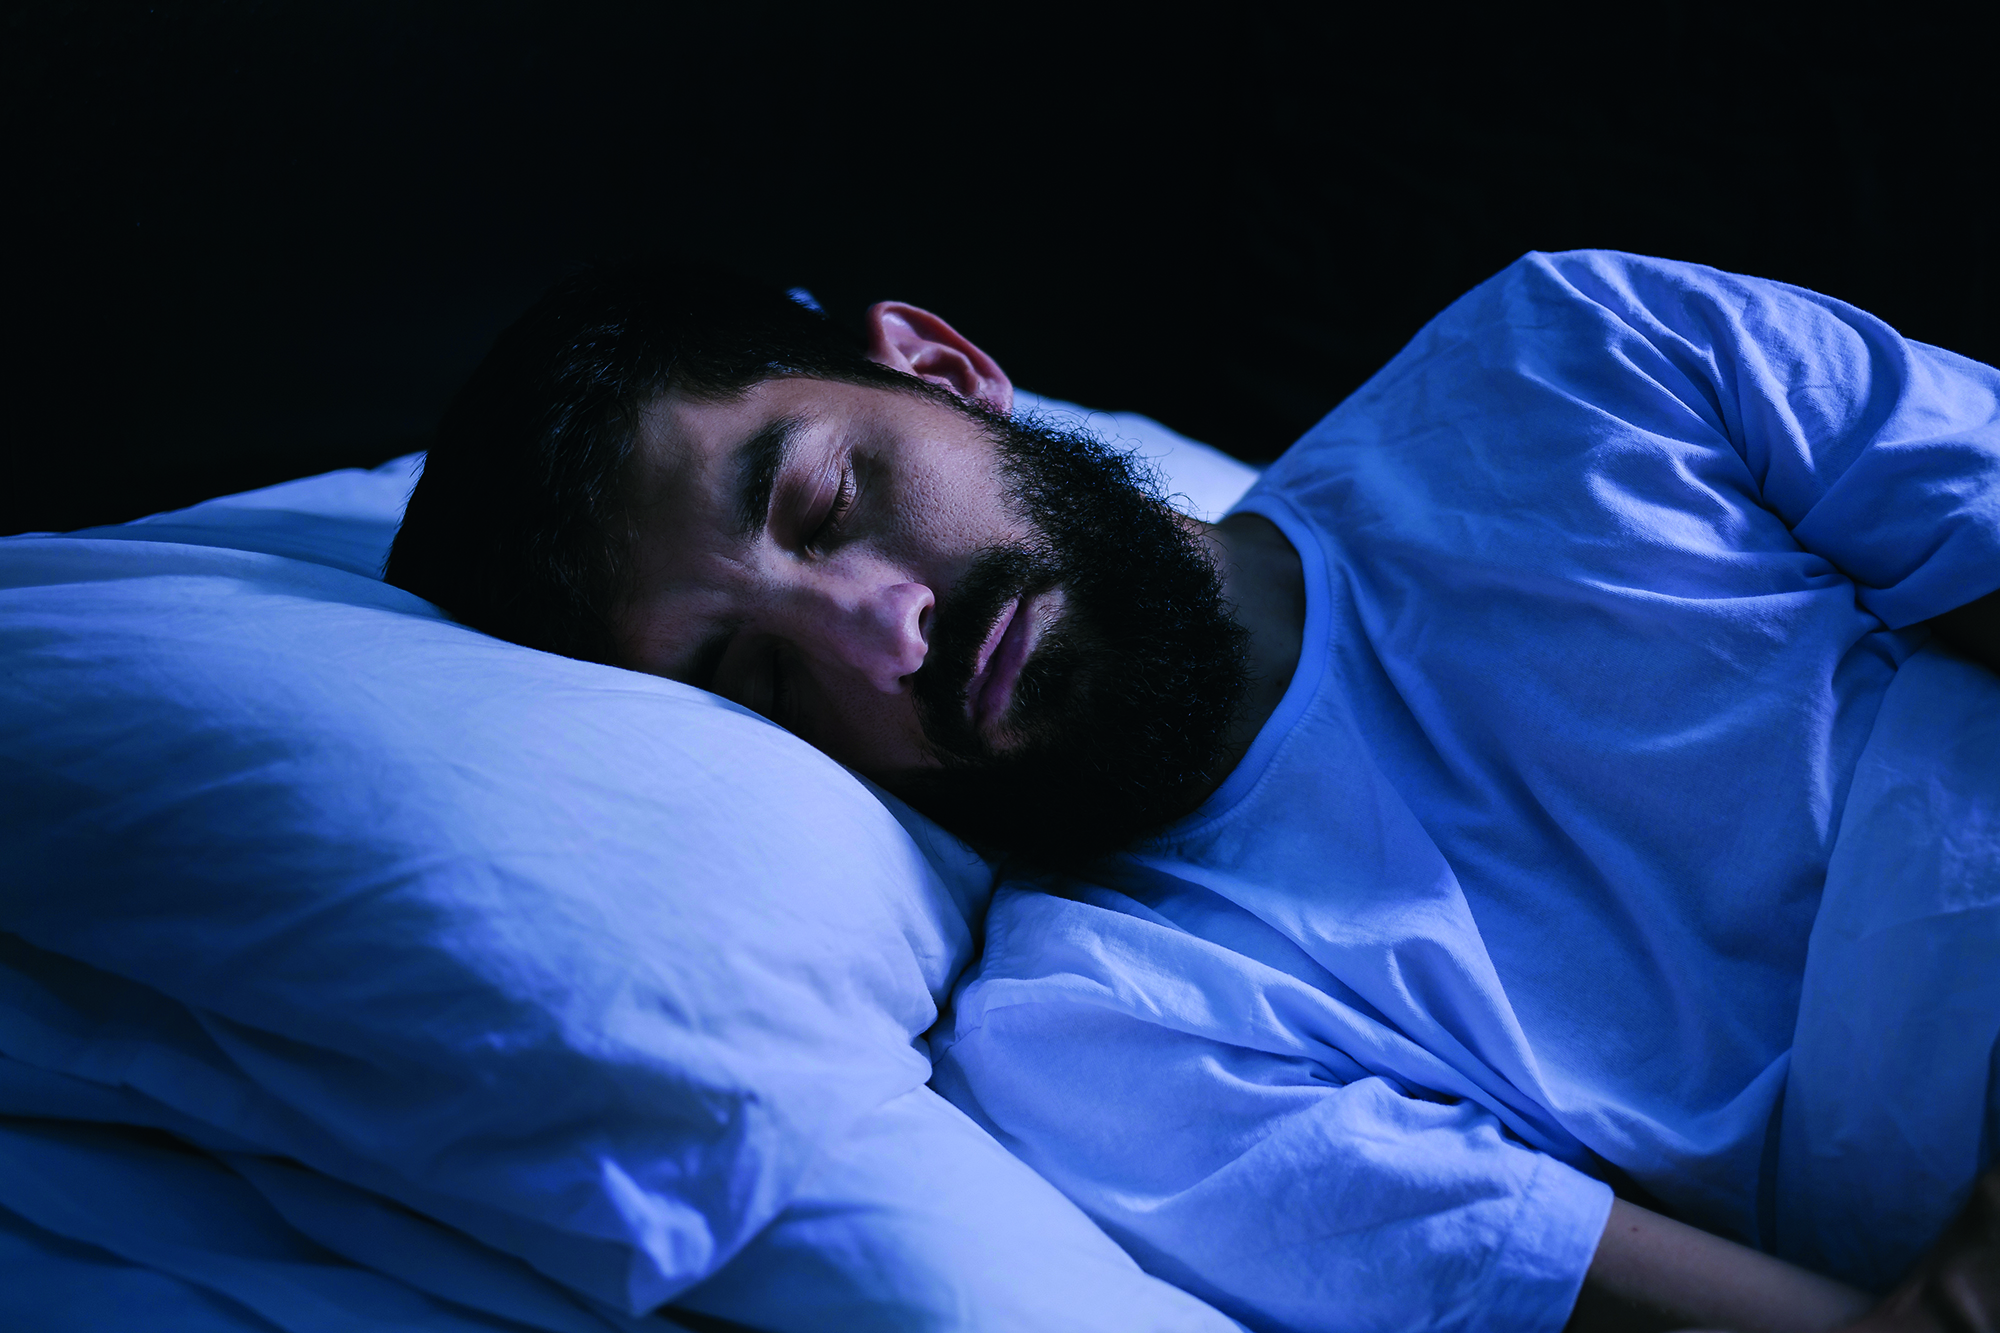 Portrait of a man sleeping in the bed at home